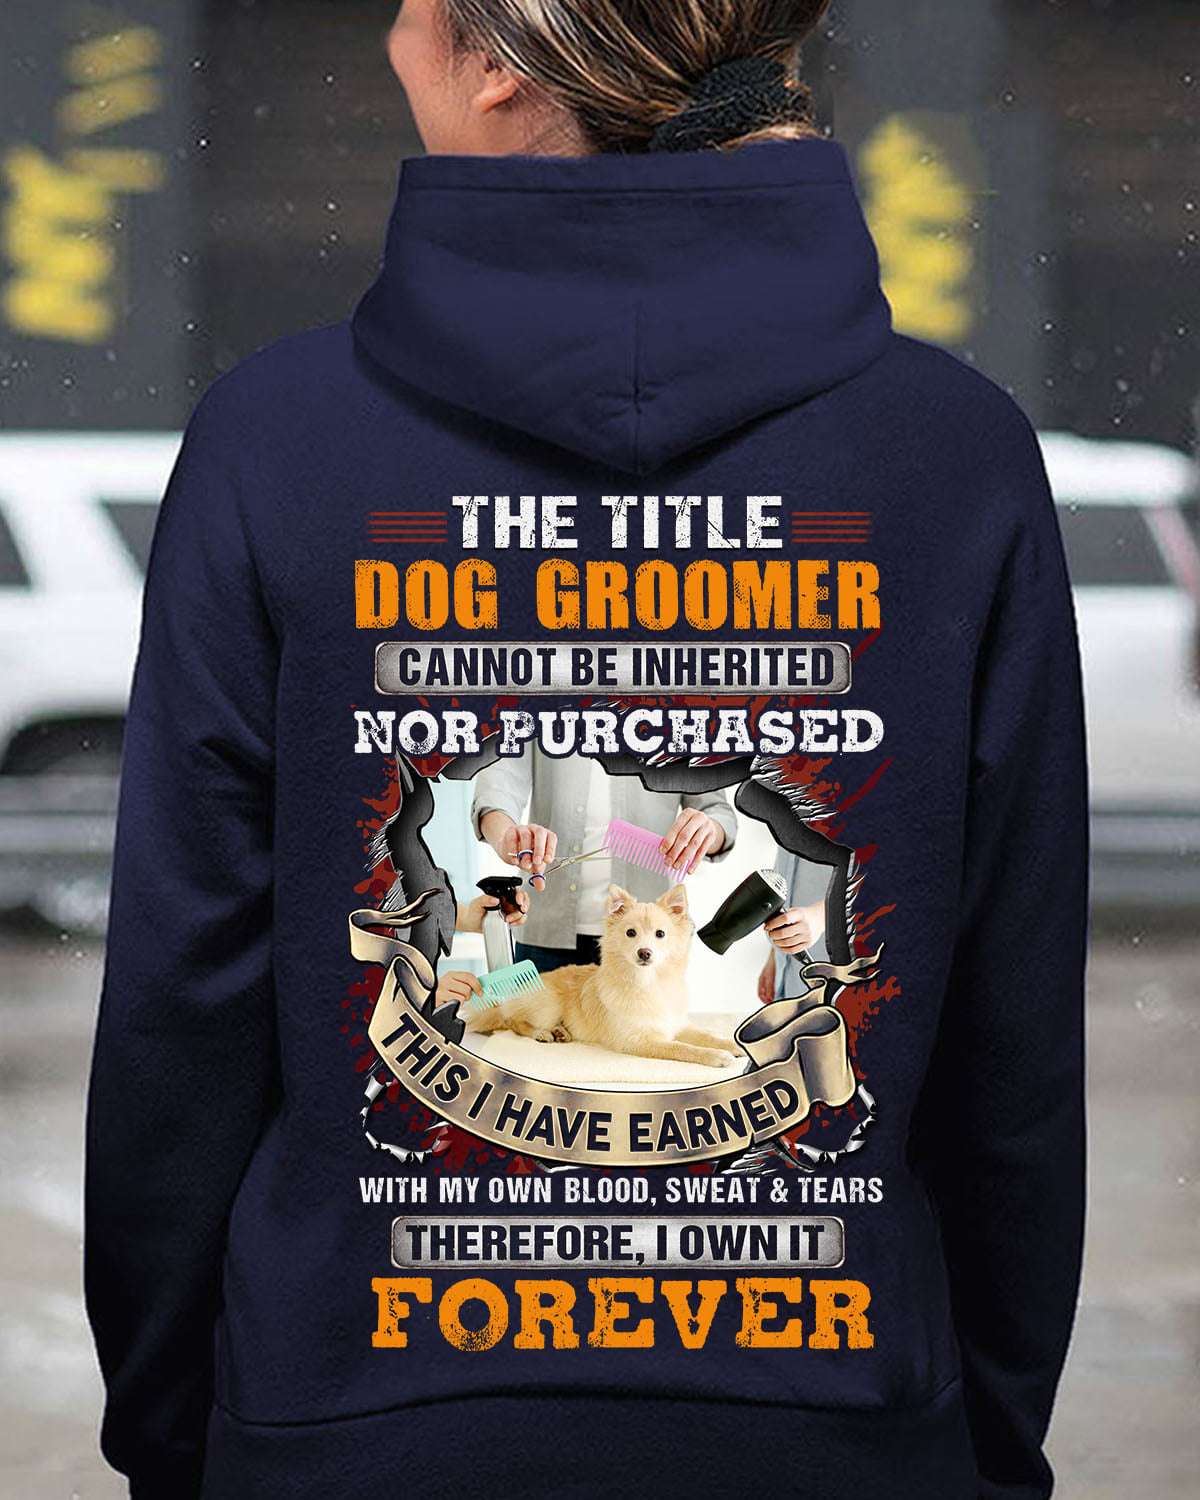 The title dog groomer cannot be inherited nor purchased - Dog groomer the job, caring dog